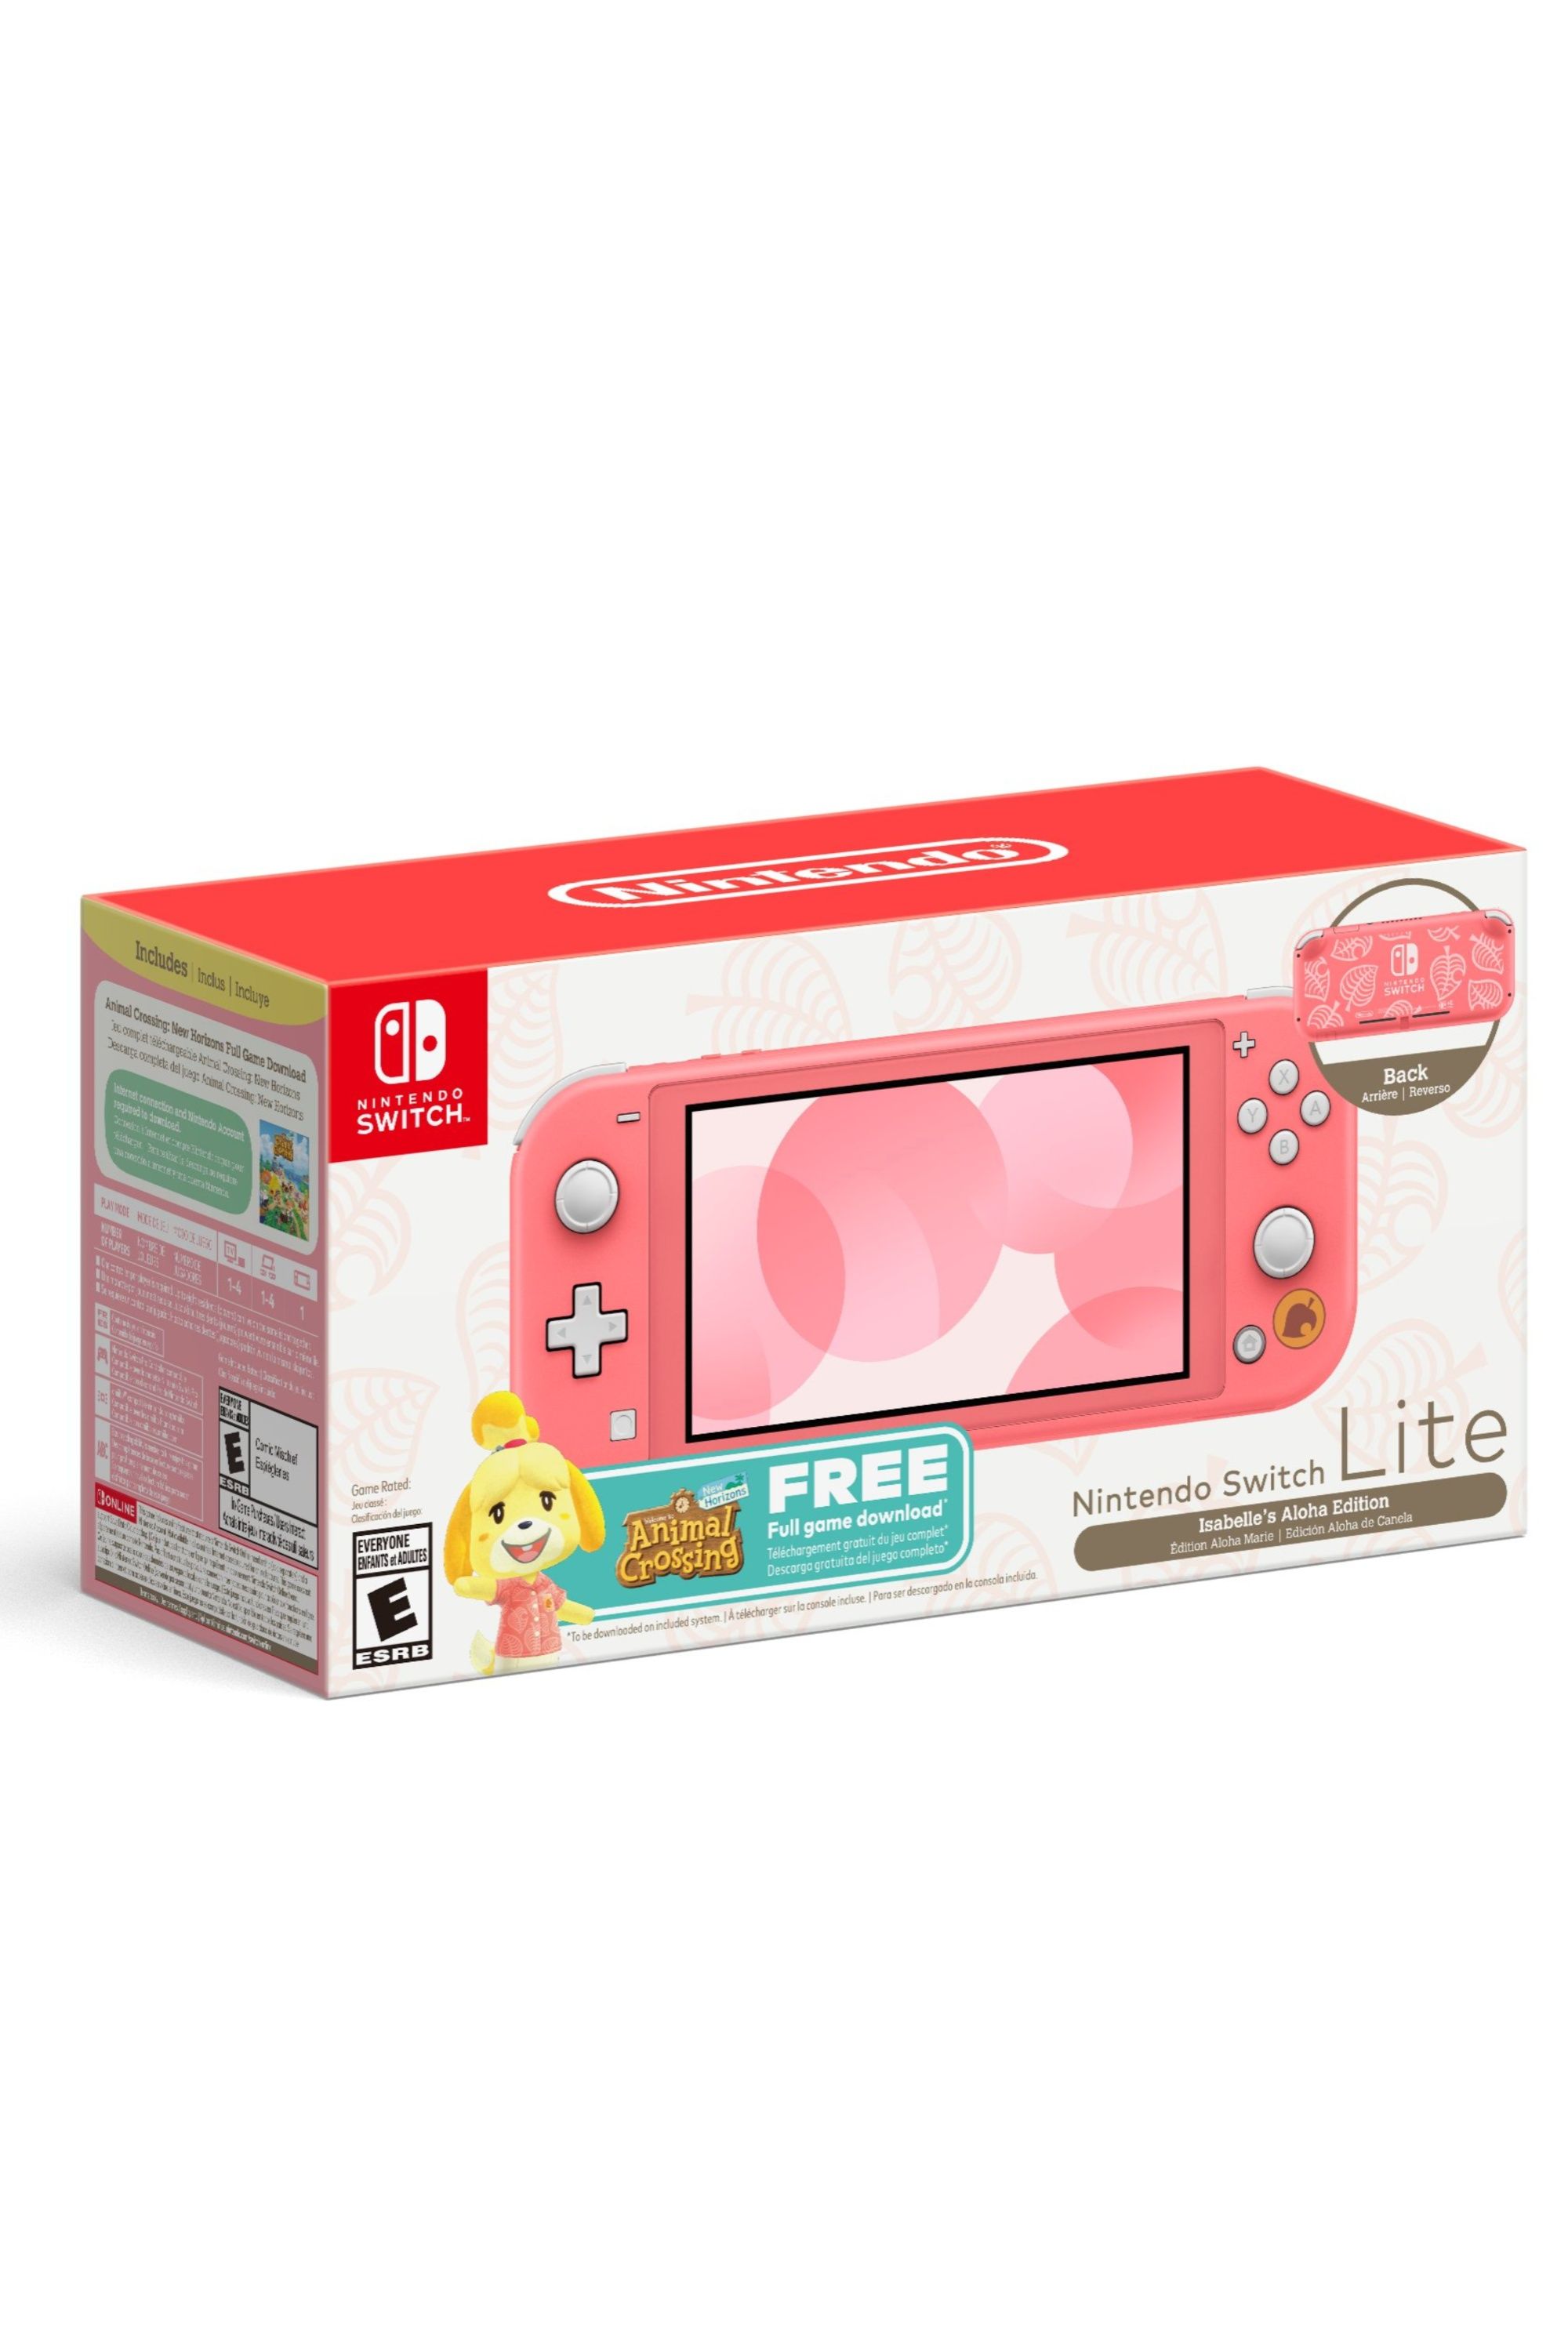 isabelle's aloha edition nintendo switch lite in its box